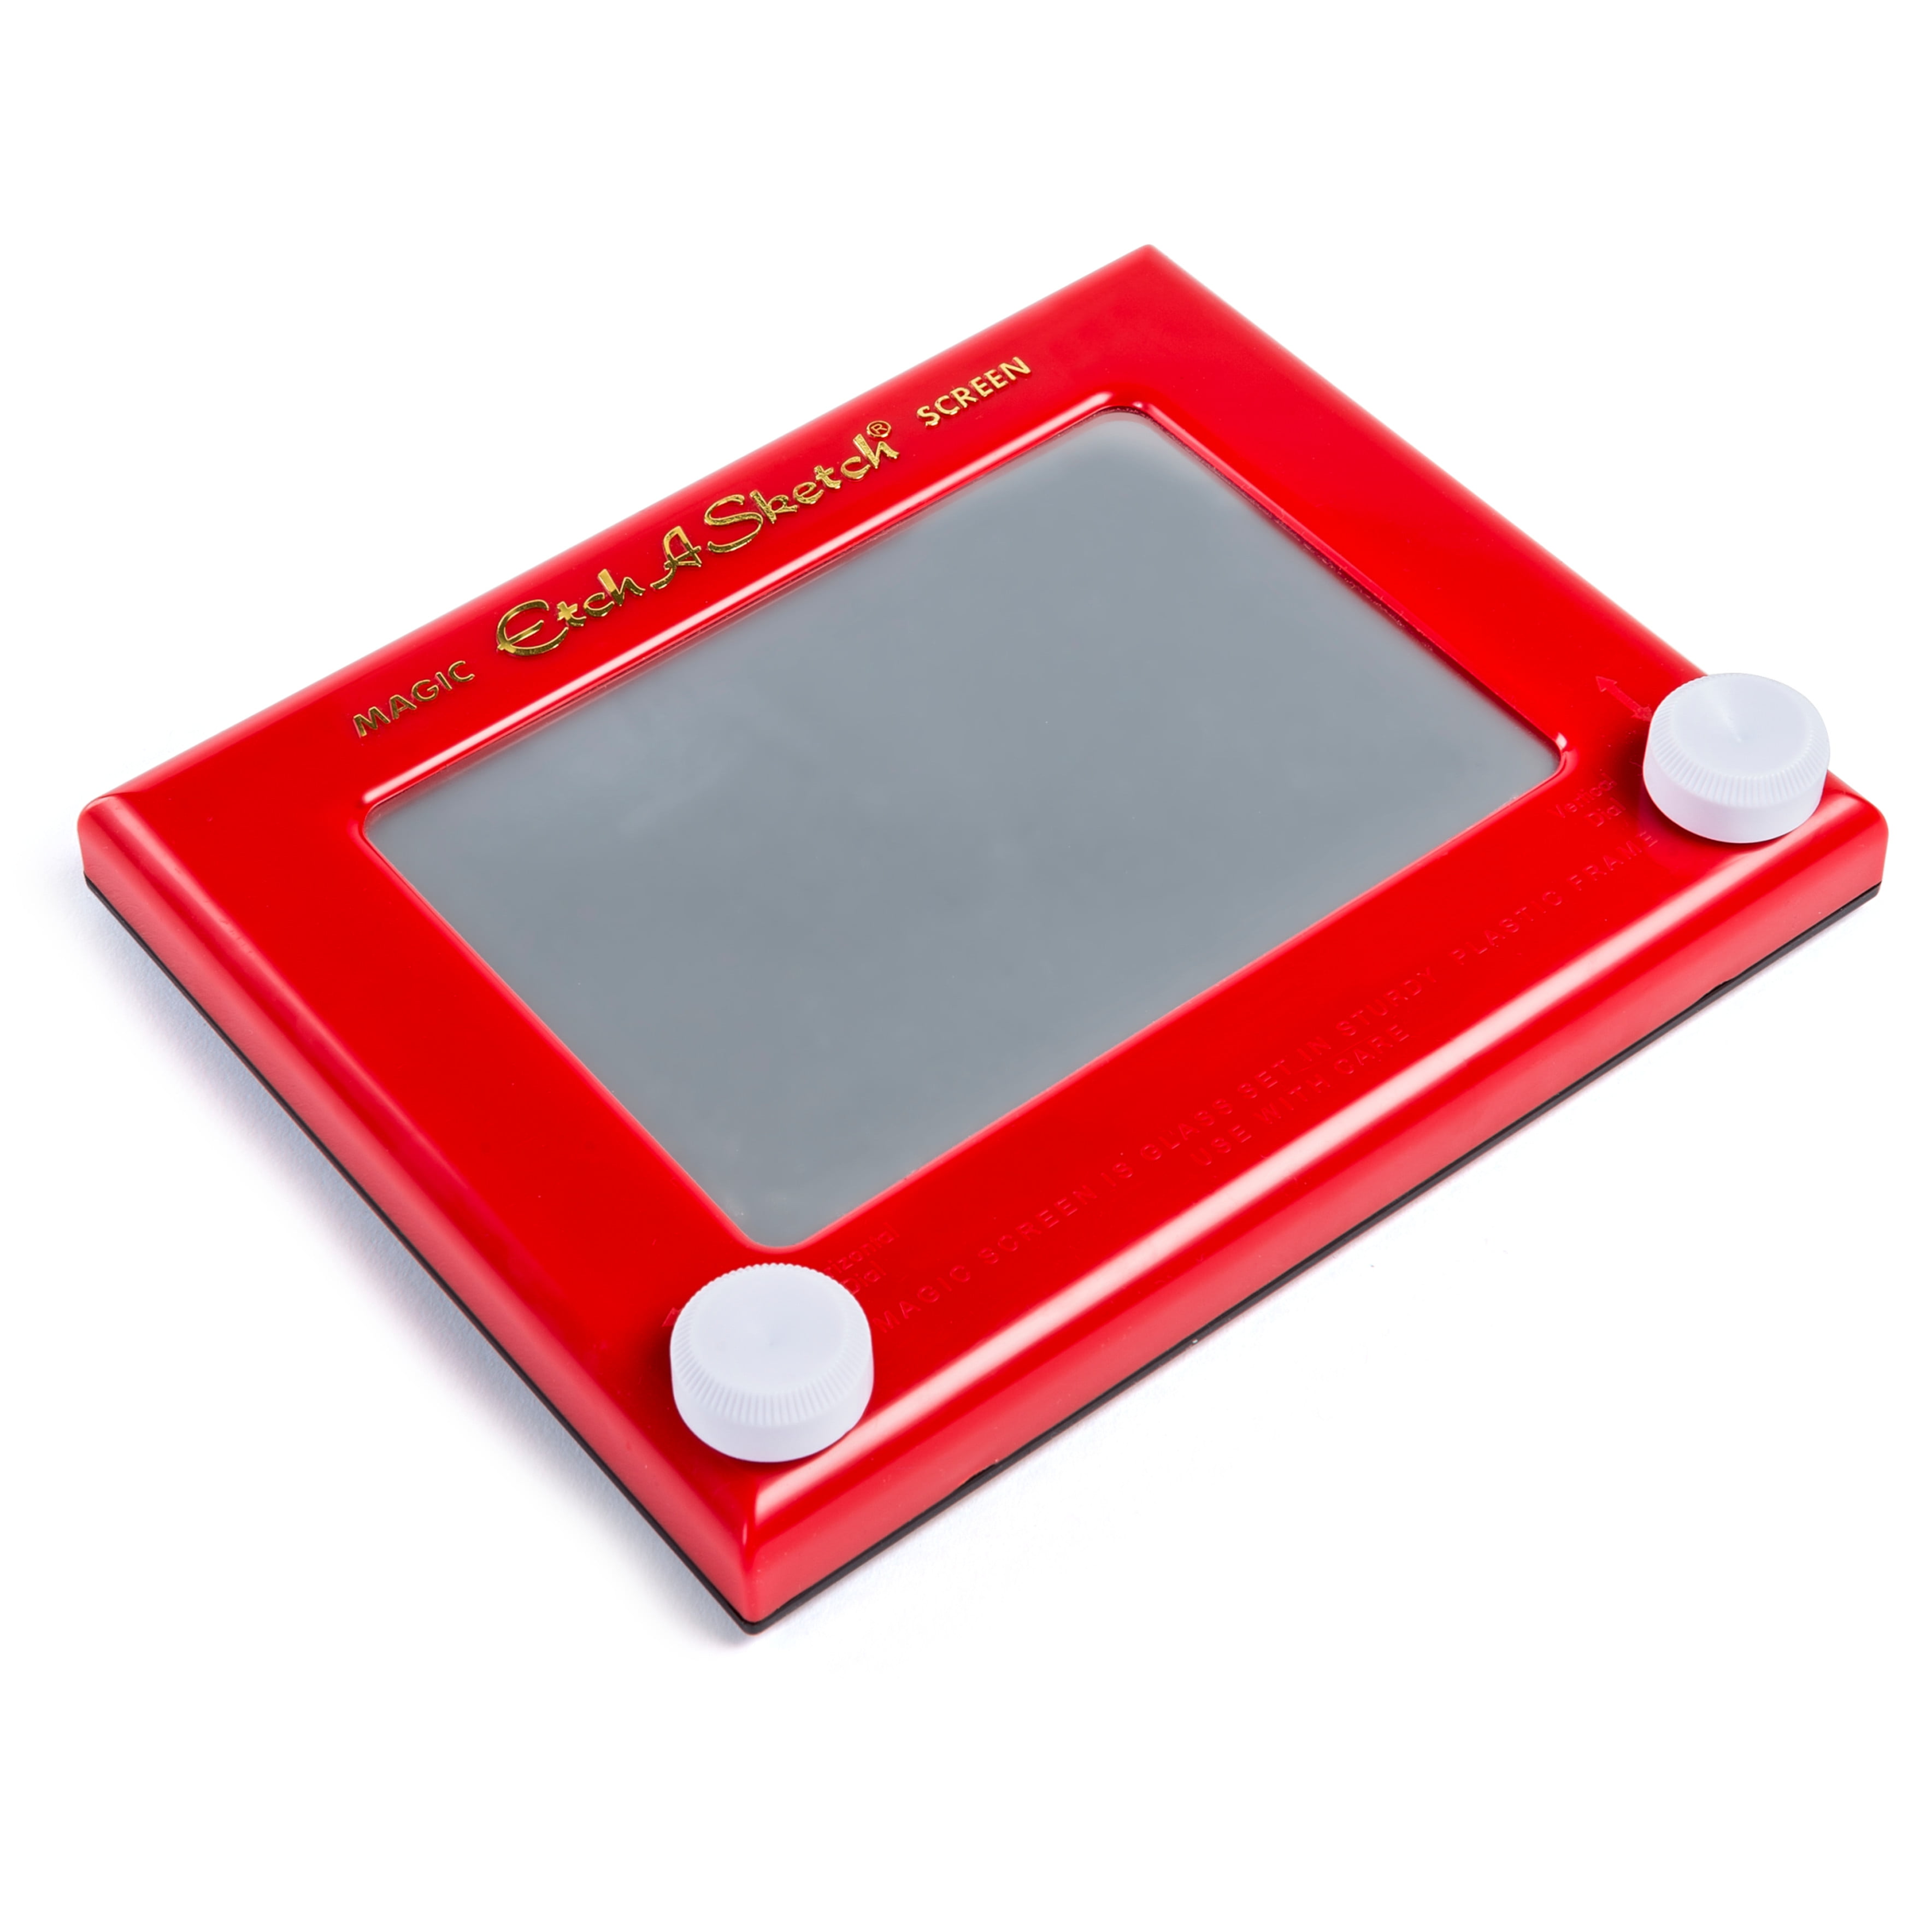 Etch A Sketch, Classic Red Drawing Toy with Magic Screen, for Ages 3 and Up  